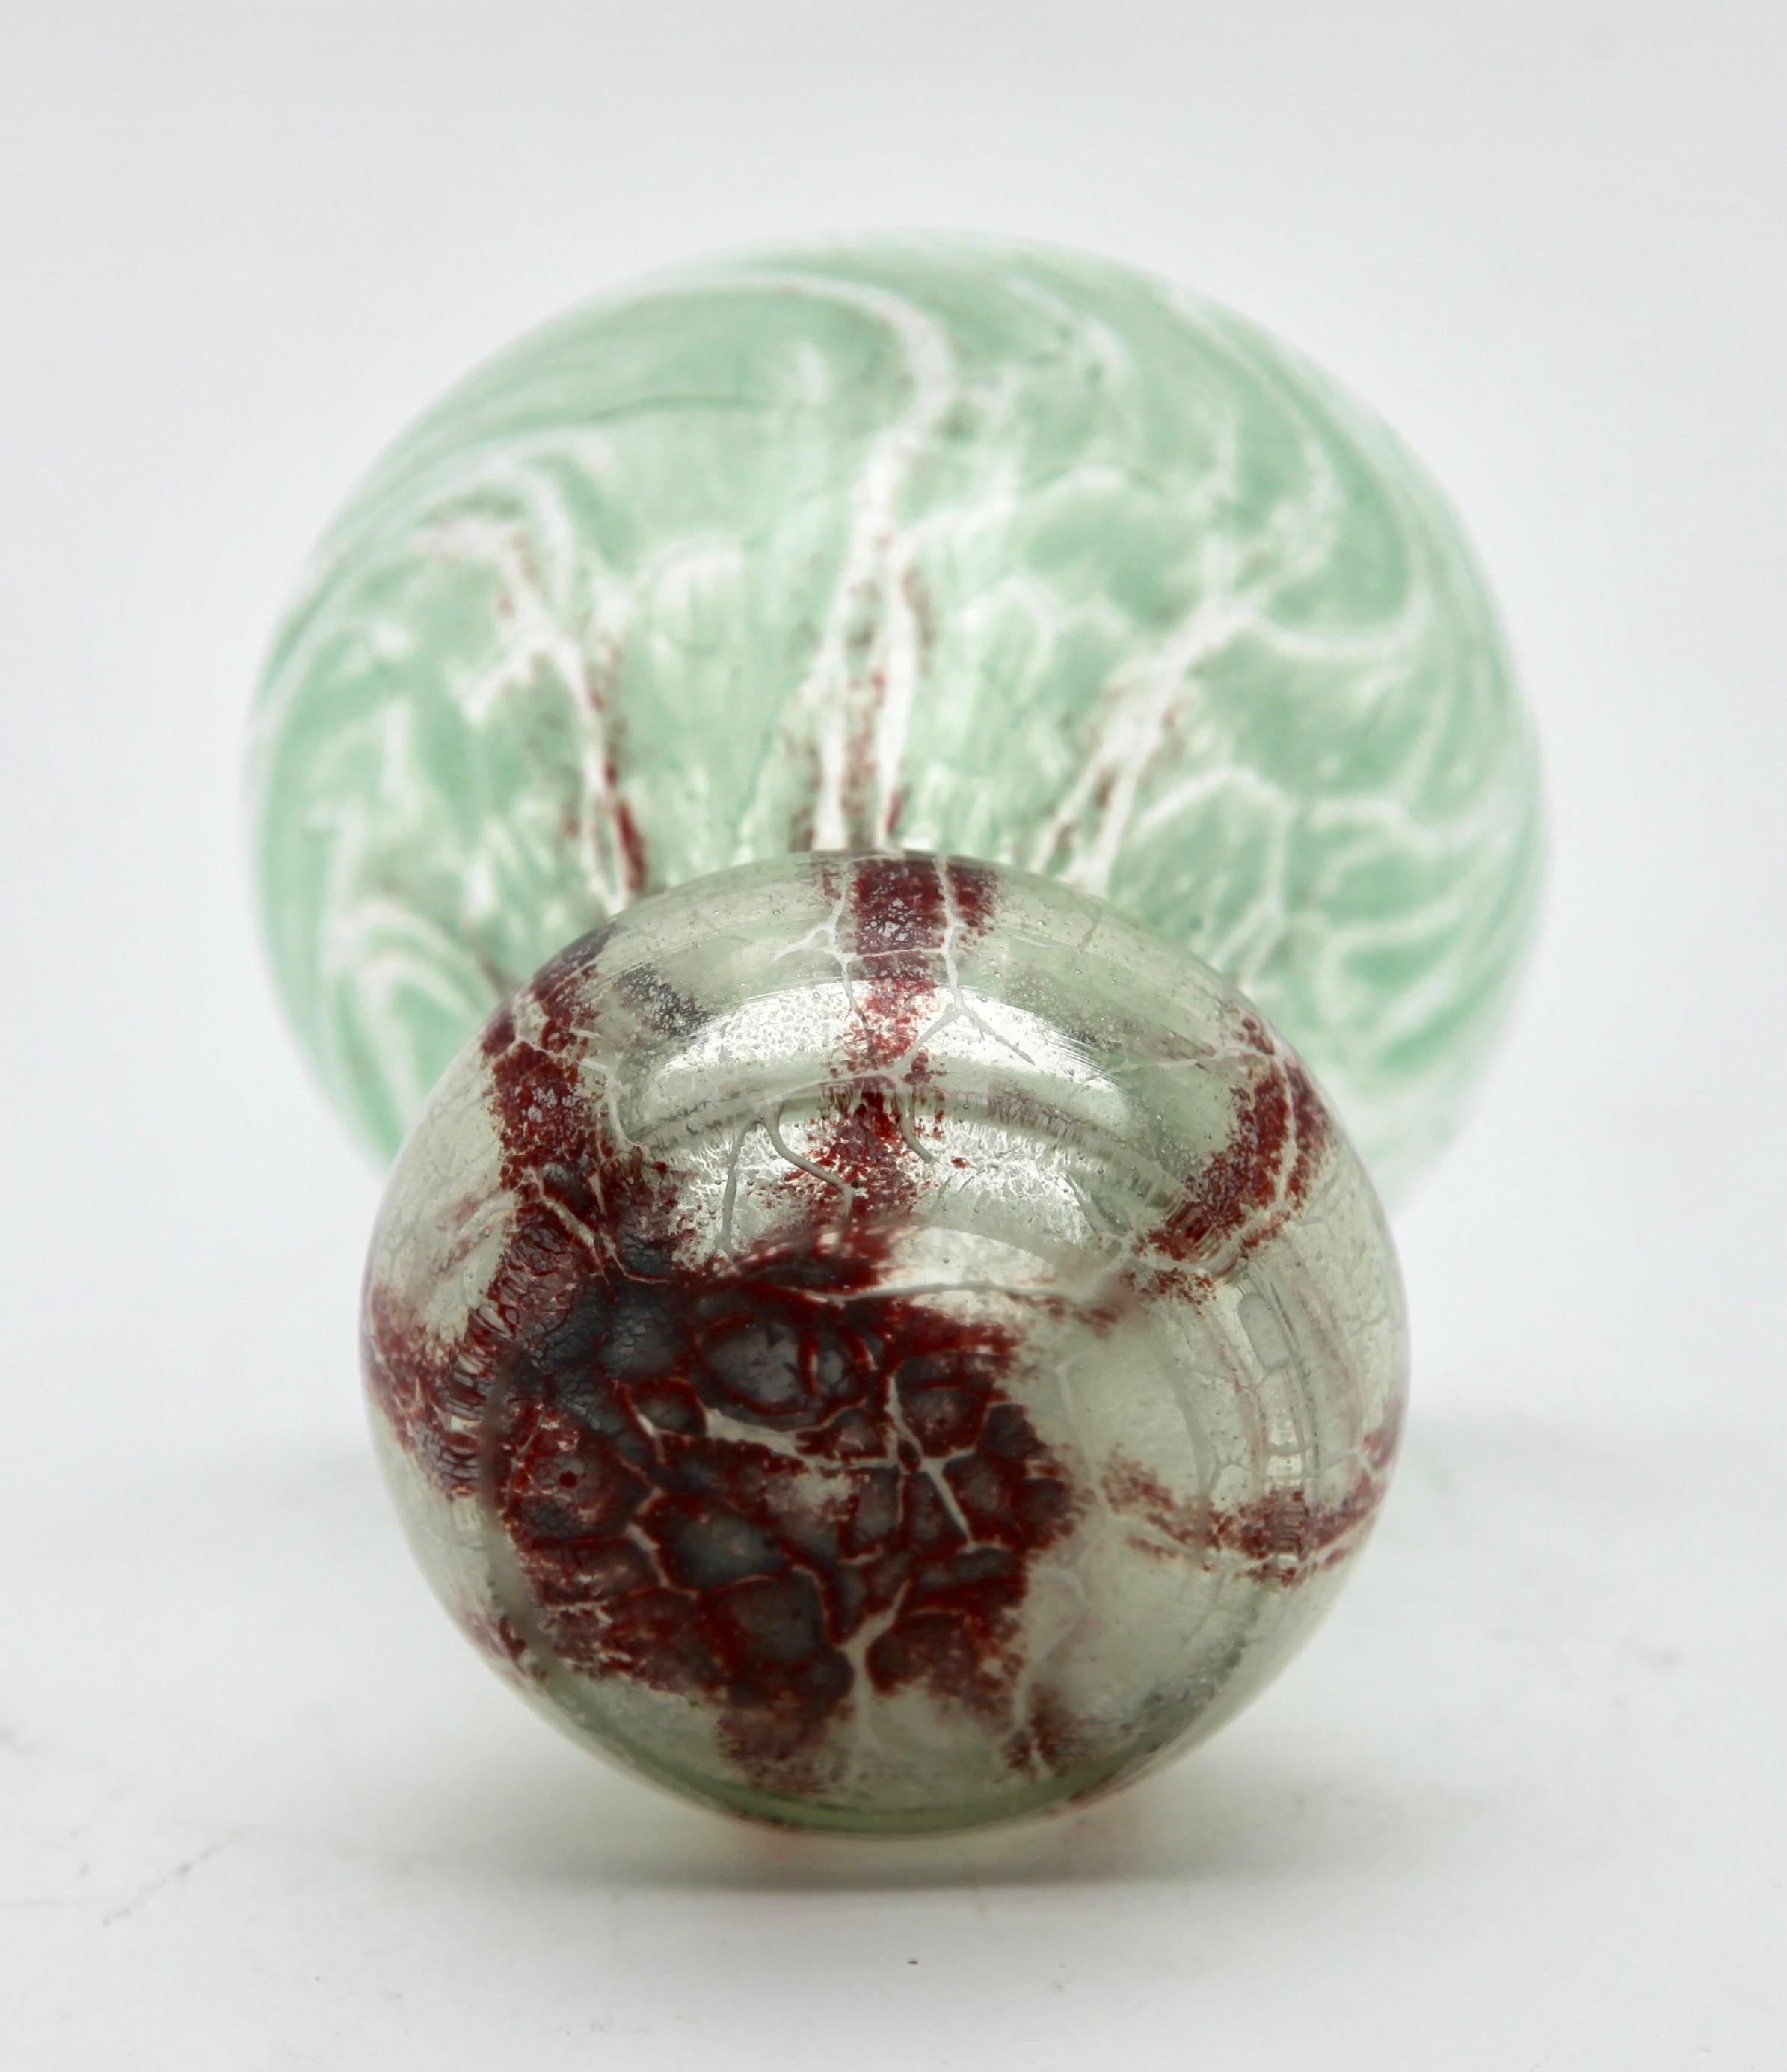 20th Century 'Ikora' Art Glass Vase, Produced, by WMF in Germany, 1930s by Karl Wiedmann For Sale